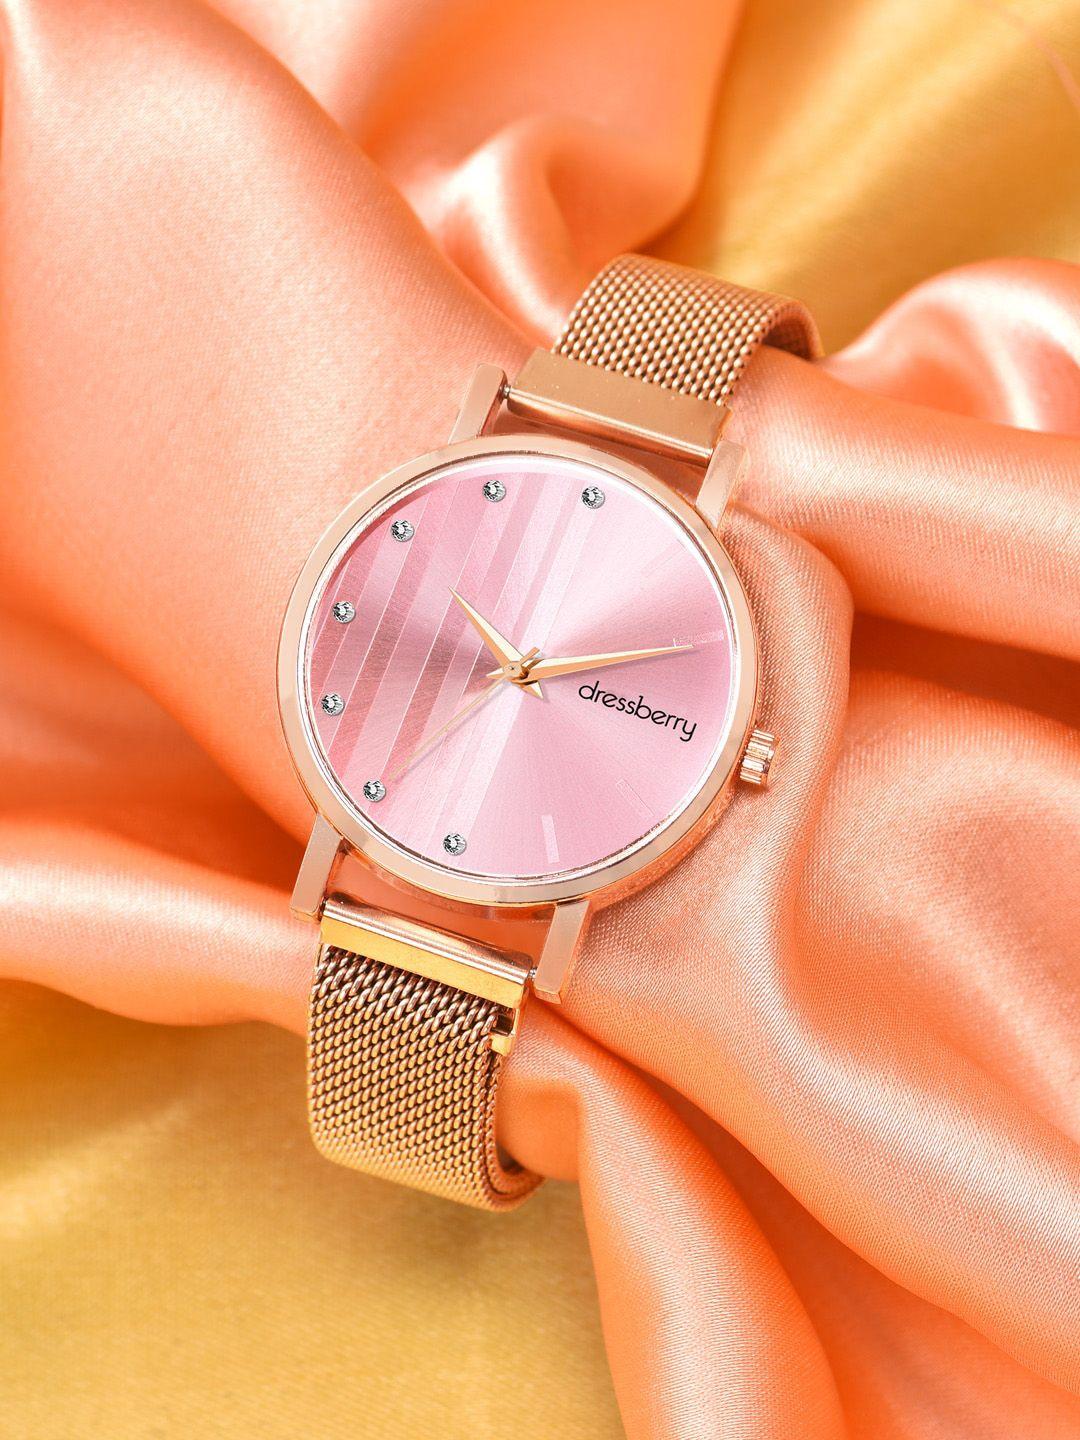 dressberry-women-pink-embellished-water-resistant-straps-analogue-watch-hobdb-132-rg-pk